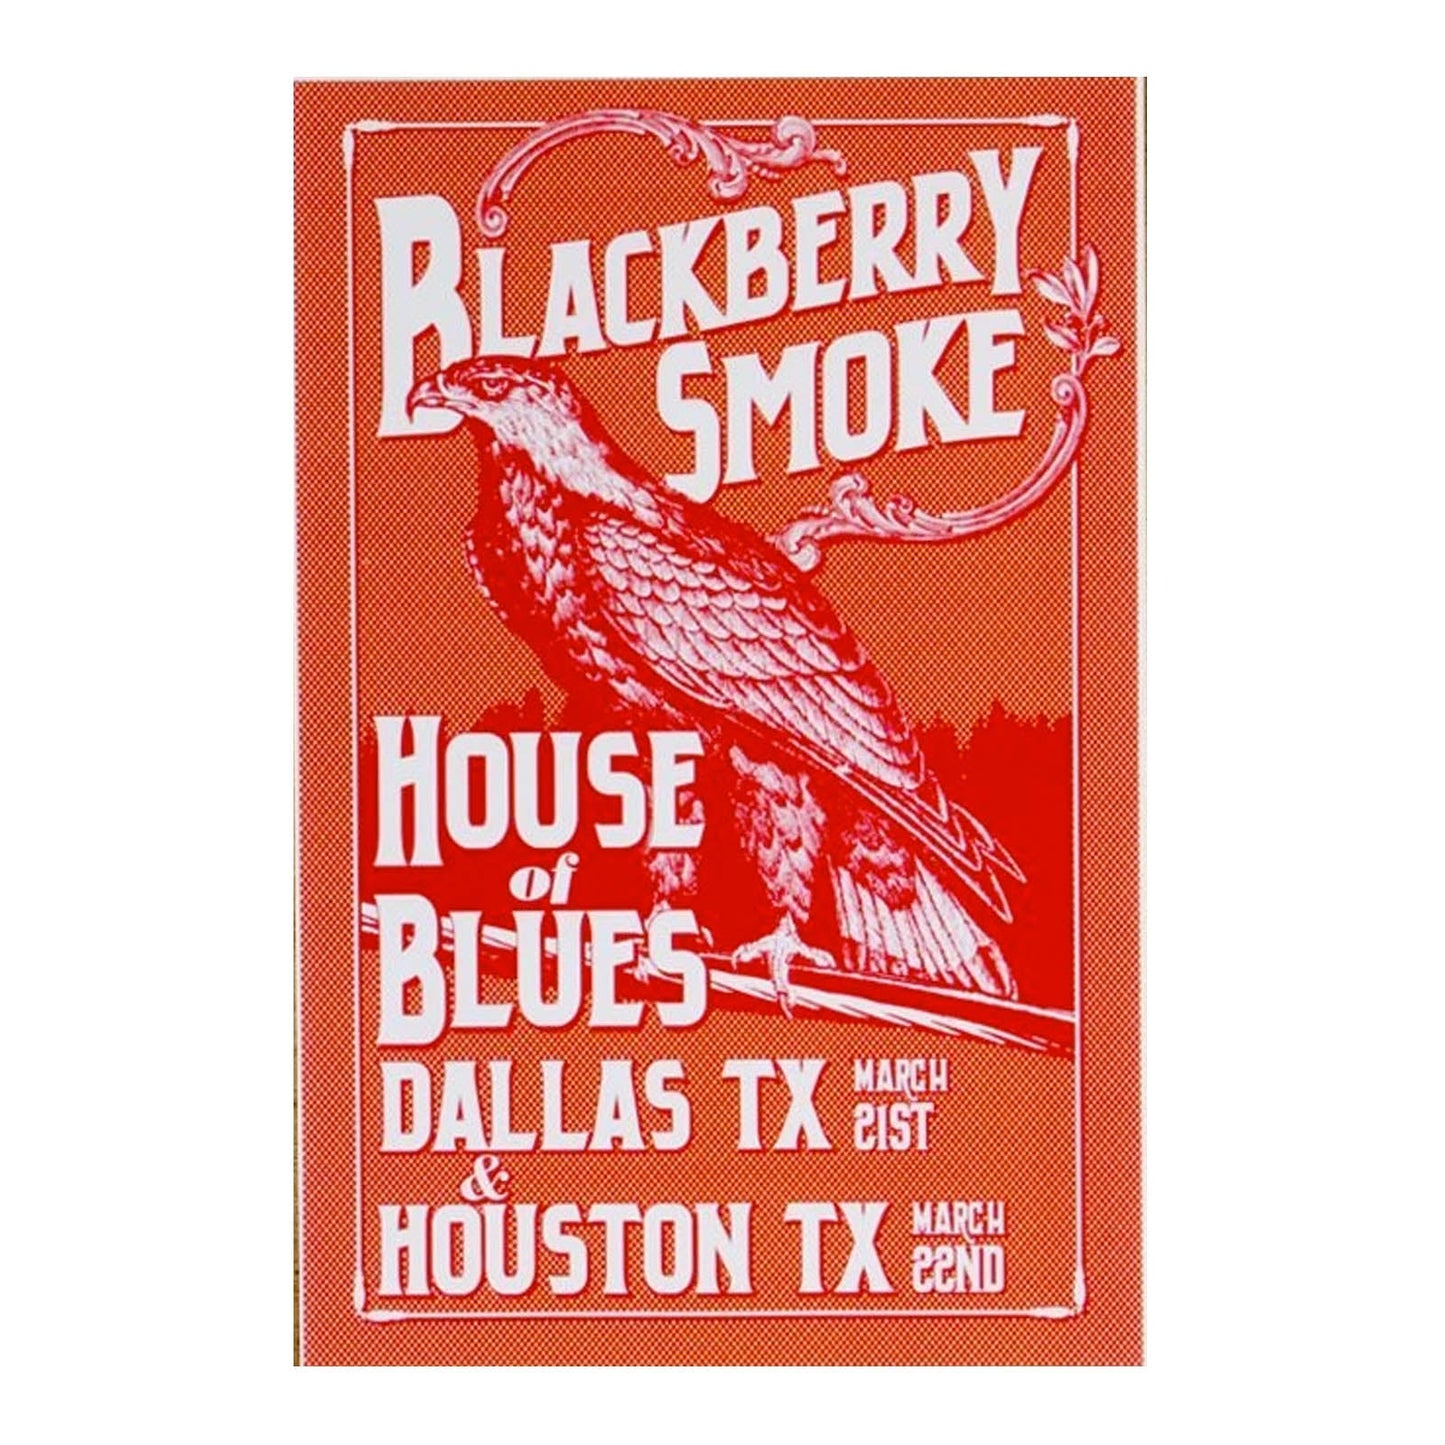 House of Blues - Houston and Dallas, TX - March 21 and 22, 2013 - D15